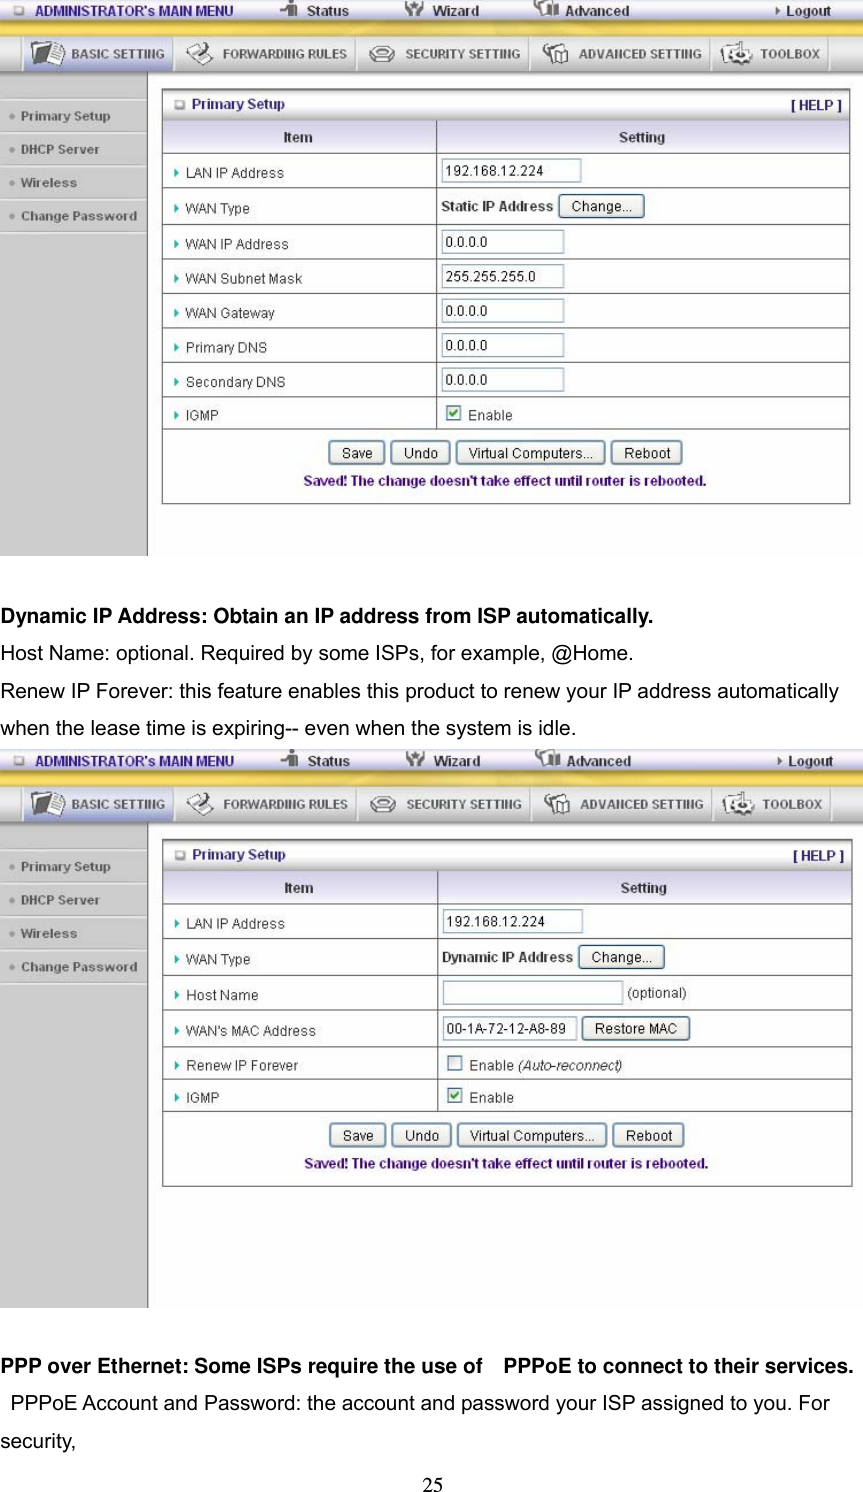  25  Dynamic IP Address: Obtain an IP address from ISP automatically. Host Name: optional. Required by some ISPs, for example, @Home. Renew IP Forever: this feature enables this product to renew your IP address automatically when the lease time is expiring-- even when the system is idle.   PPP over Ethernet: Some ISPs require the use of    PPPoE to connect to their services.   PPPoE Account and Password: the account and password your ISP assigned to you. For security,     